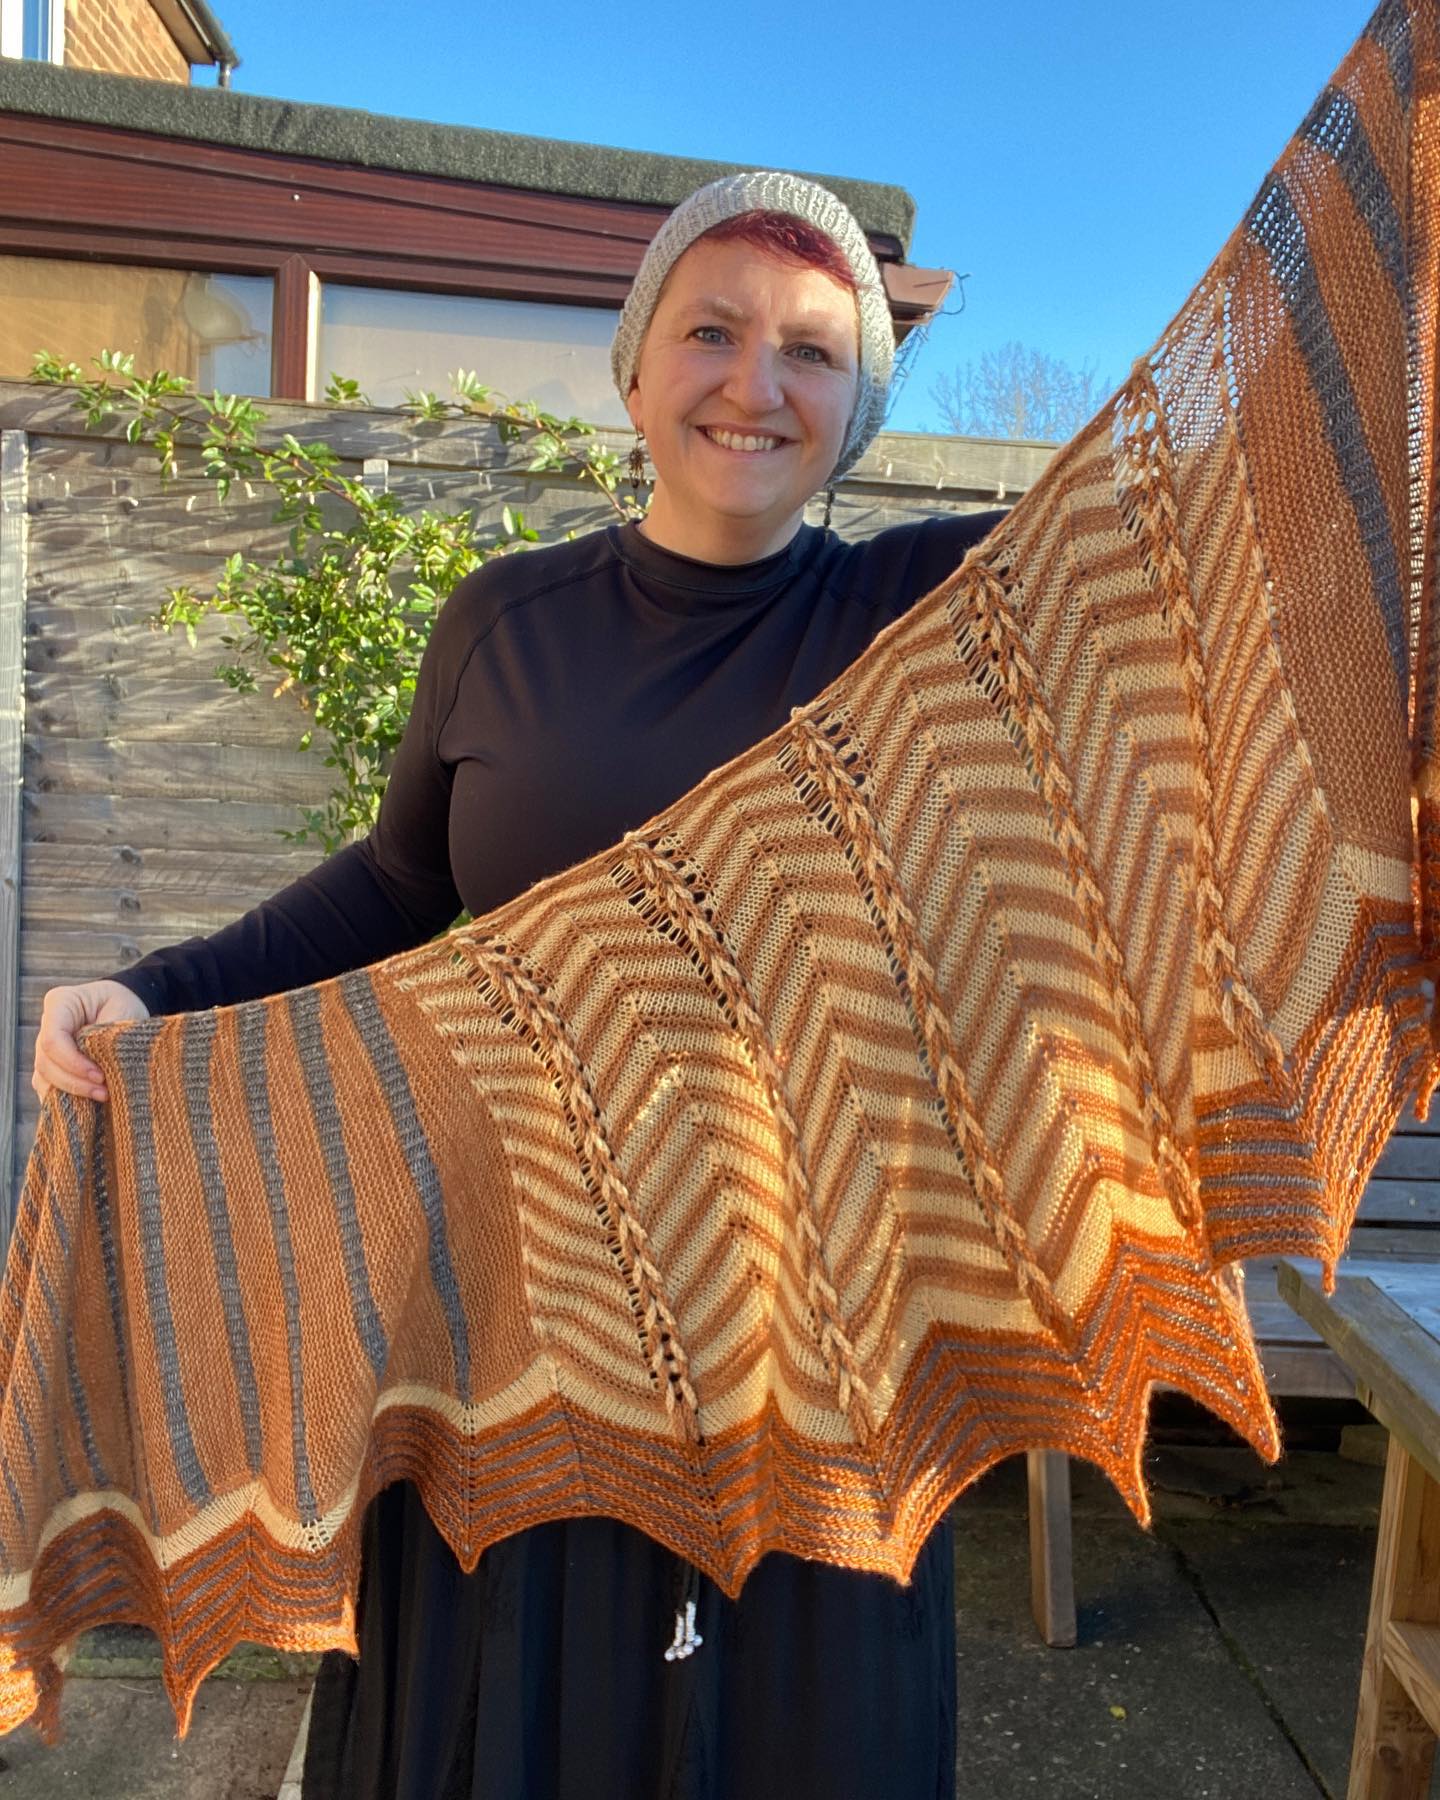 Victoria holding a shawl outstretched. The shawl features stripes and chevrons in light brown, brown a black.